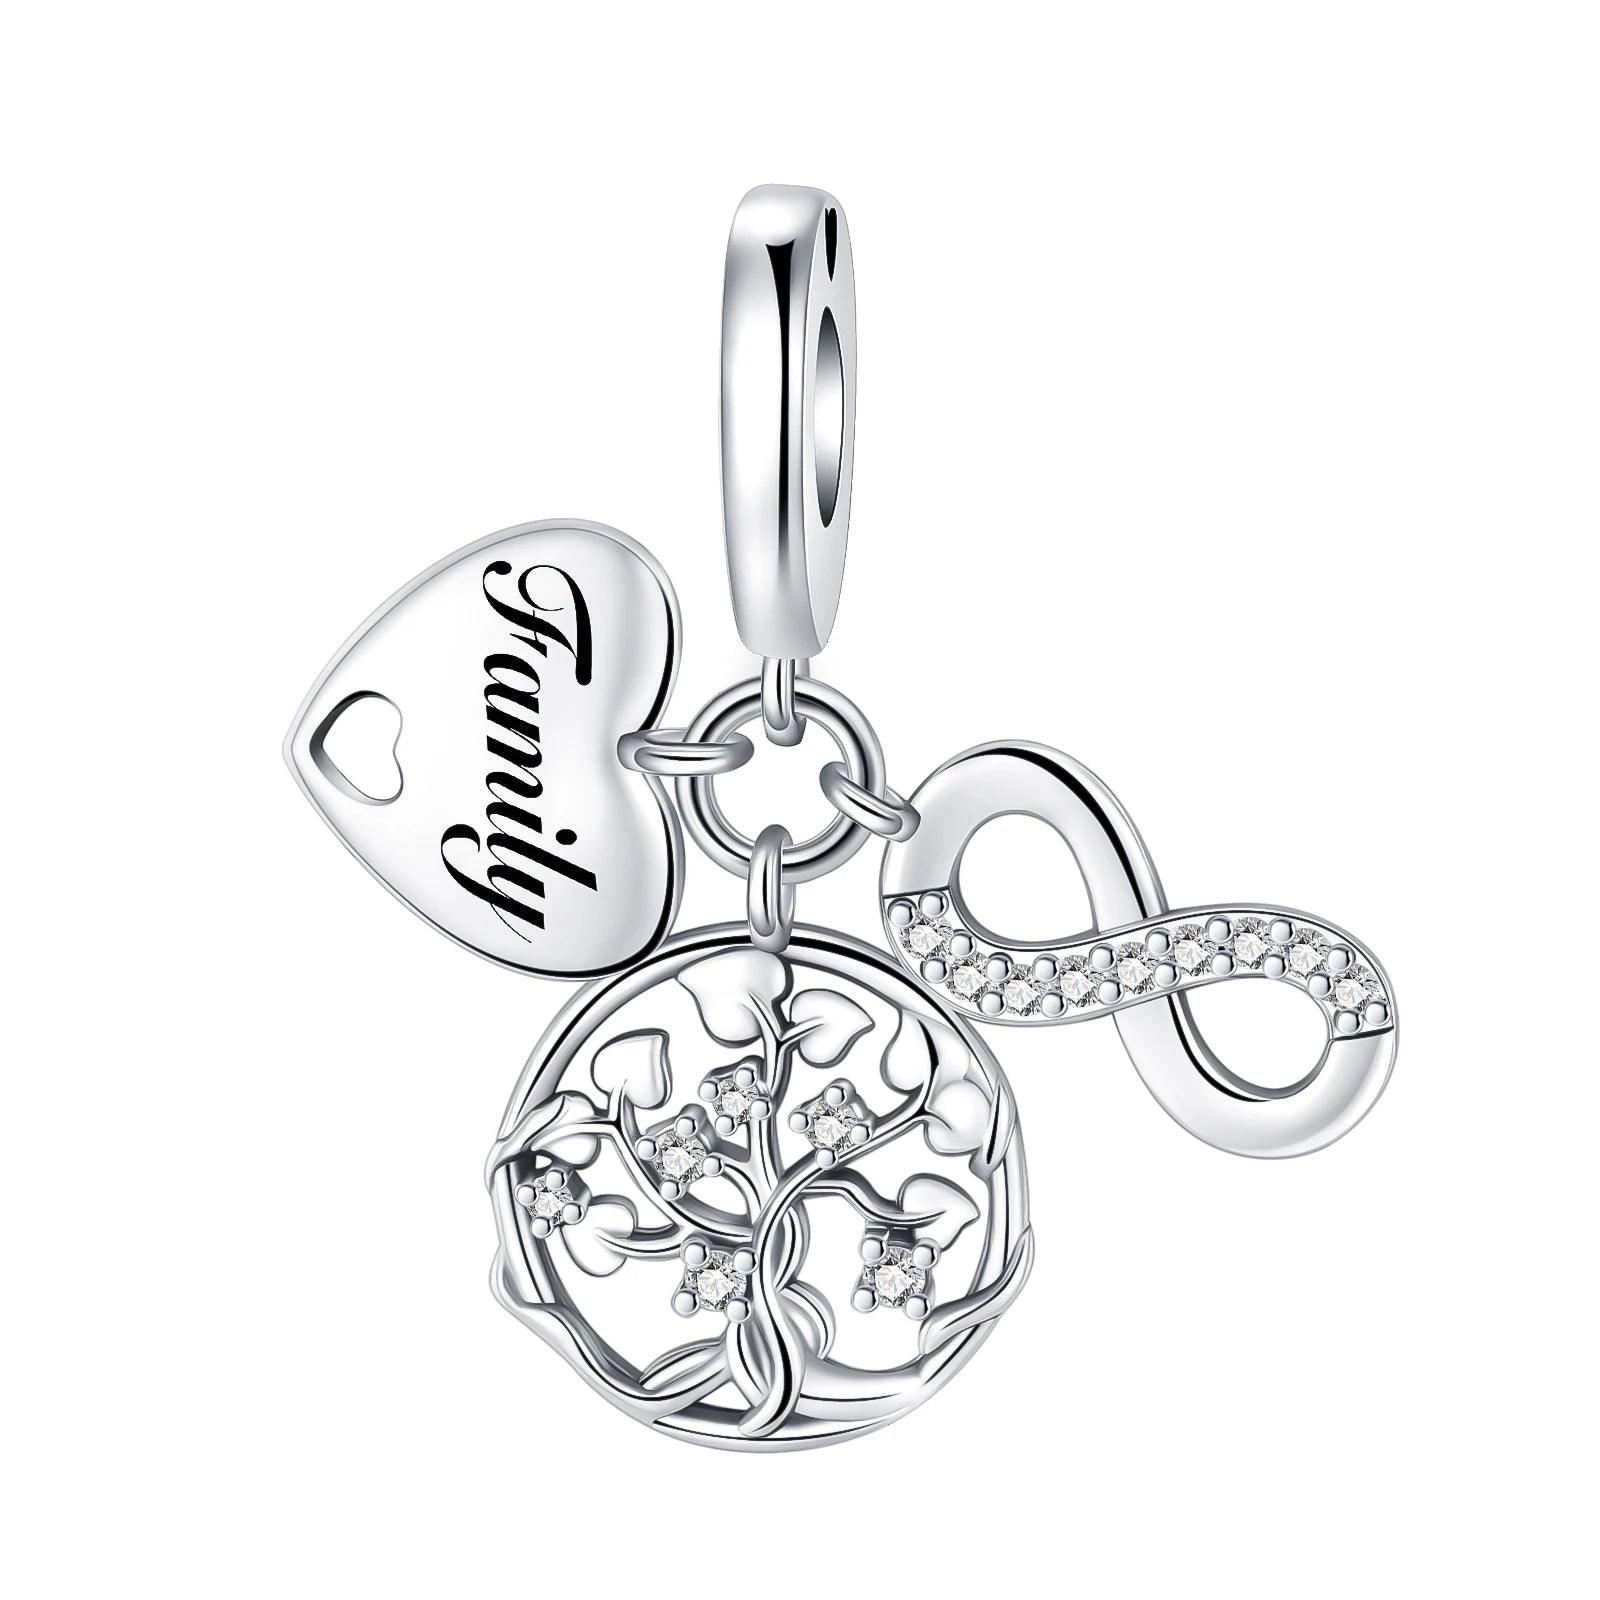 Number Puppy Family Sterling Silver Pendant with Zircon Stone - Fits Pandora 925 Original Charms Bracelets - Gift for Women  ourlum.com   